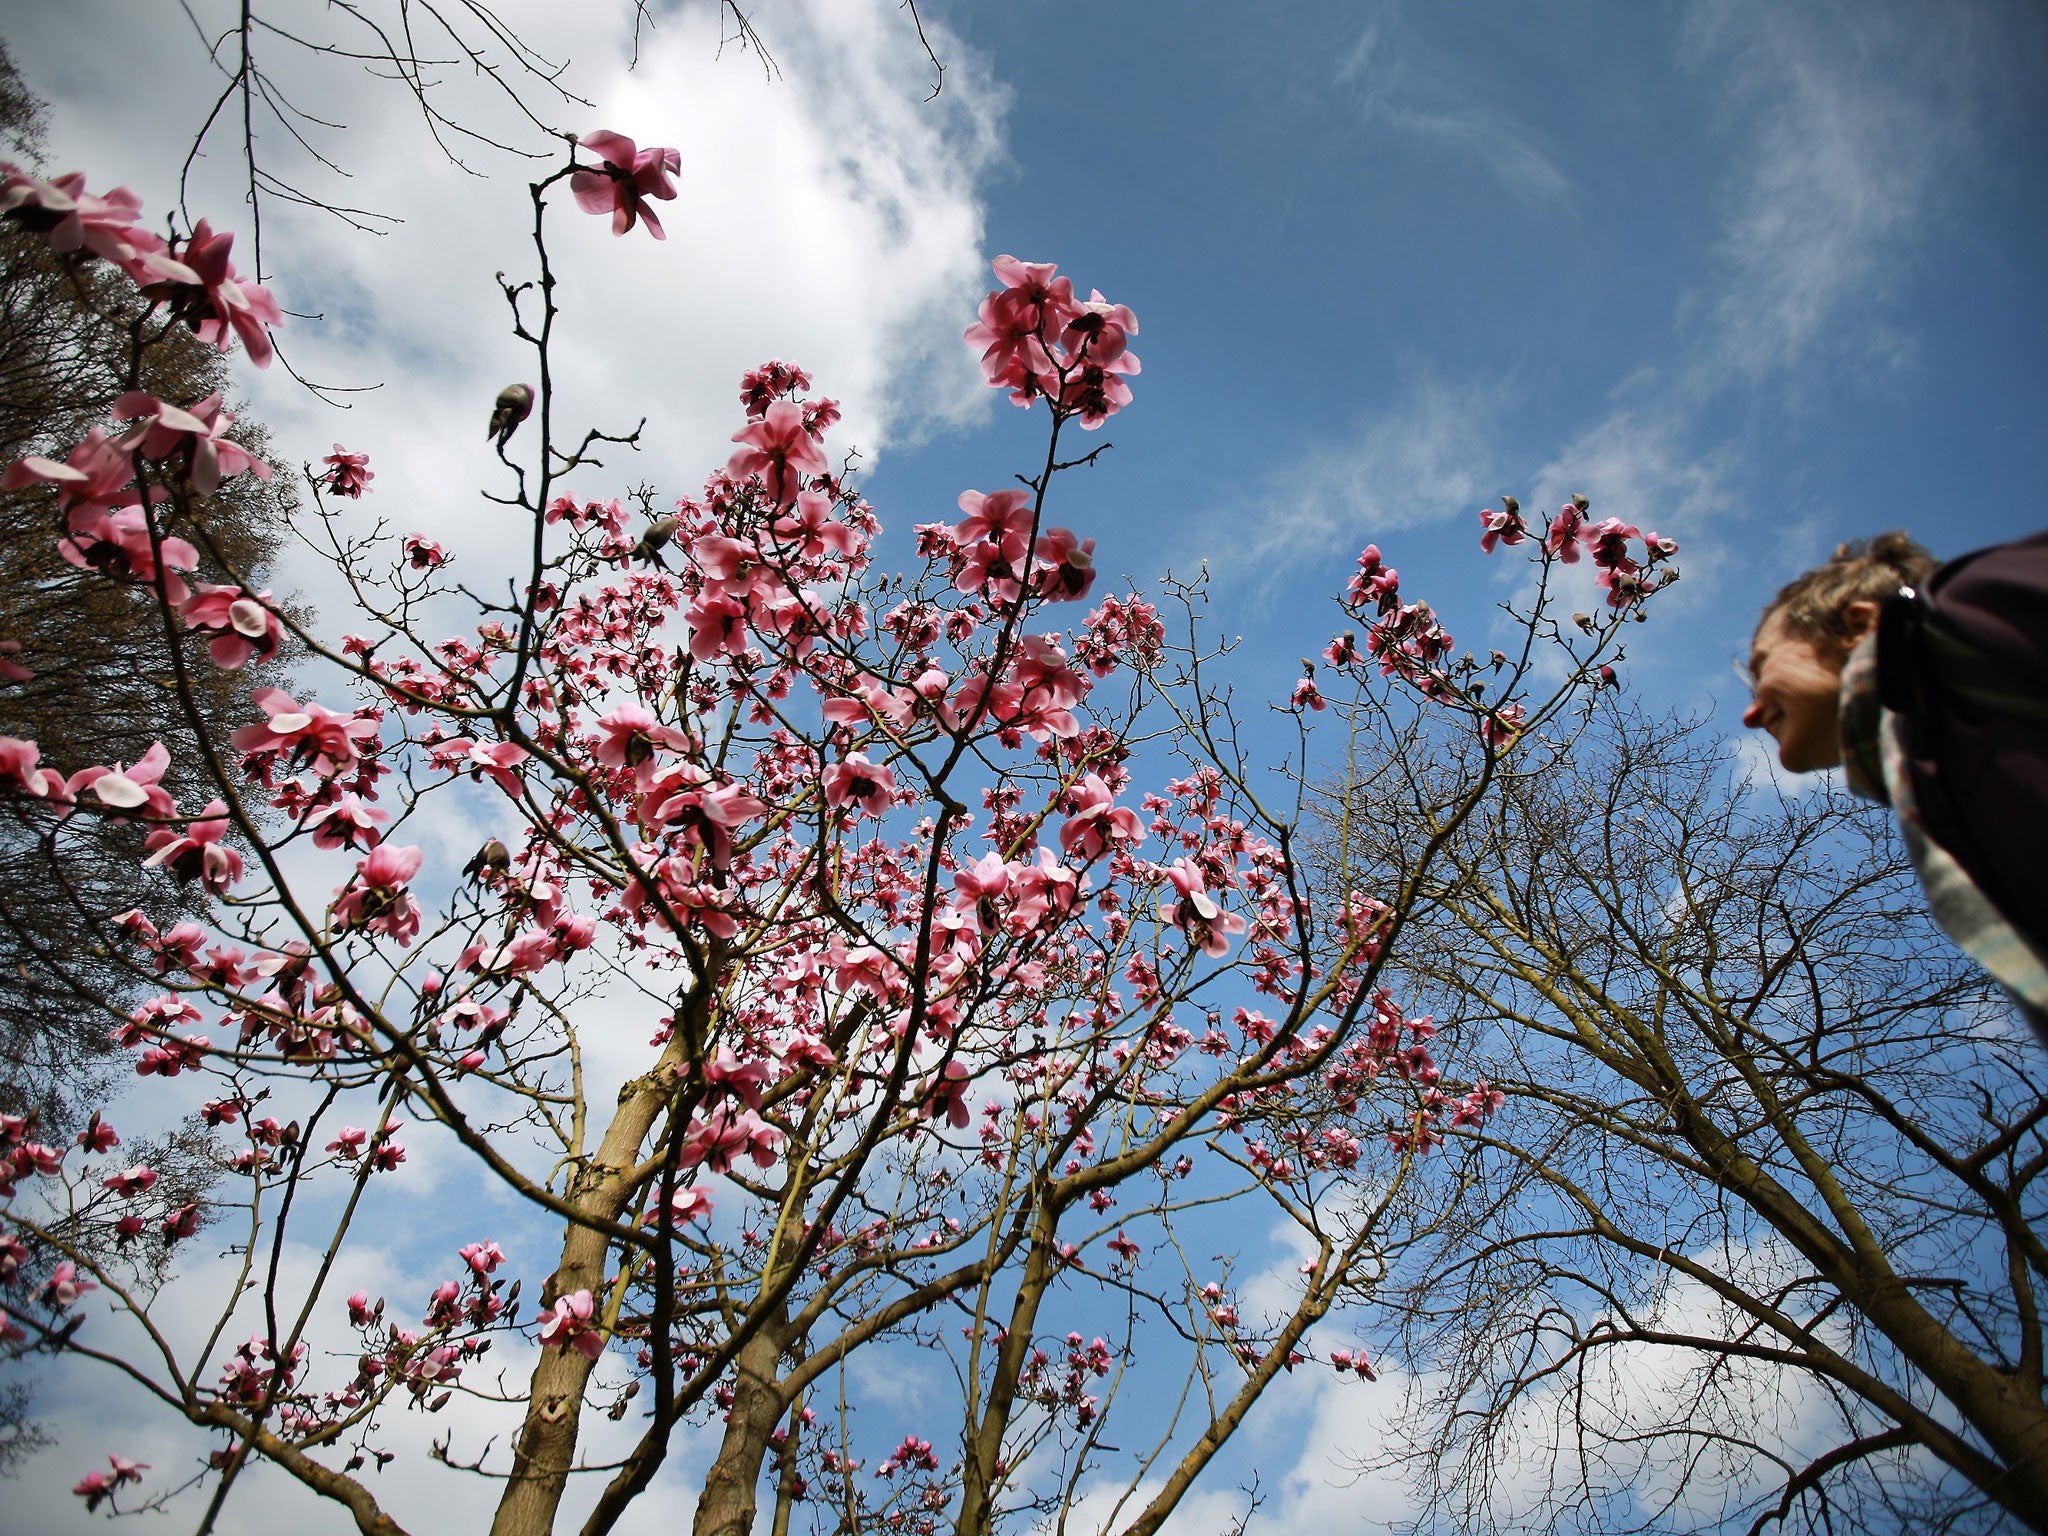 A visitor to The Royal Botanical Gardens, Kew looks up at the blossom of a Magnolia tree